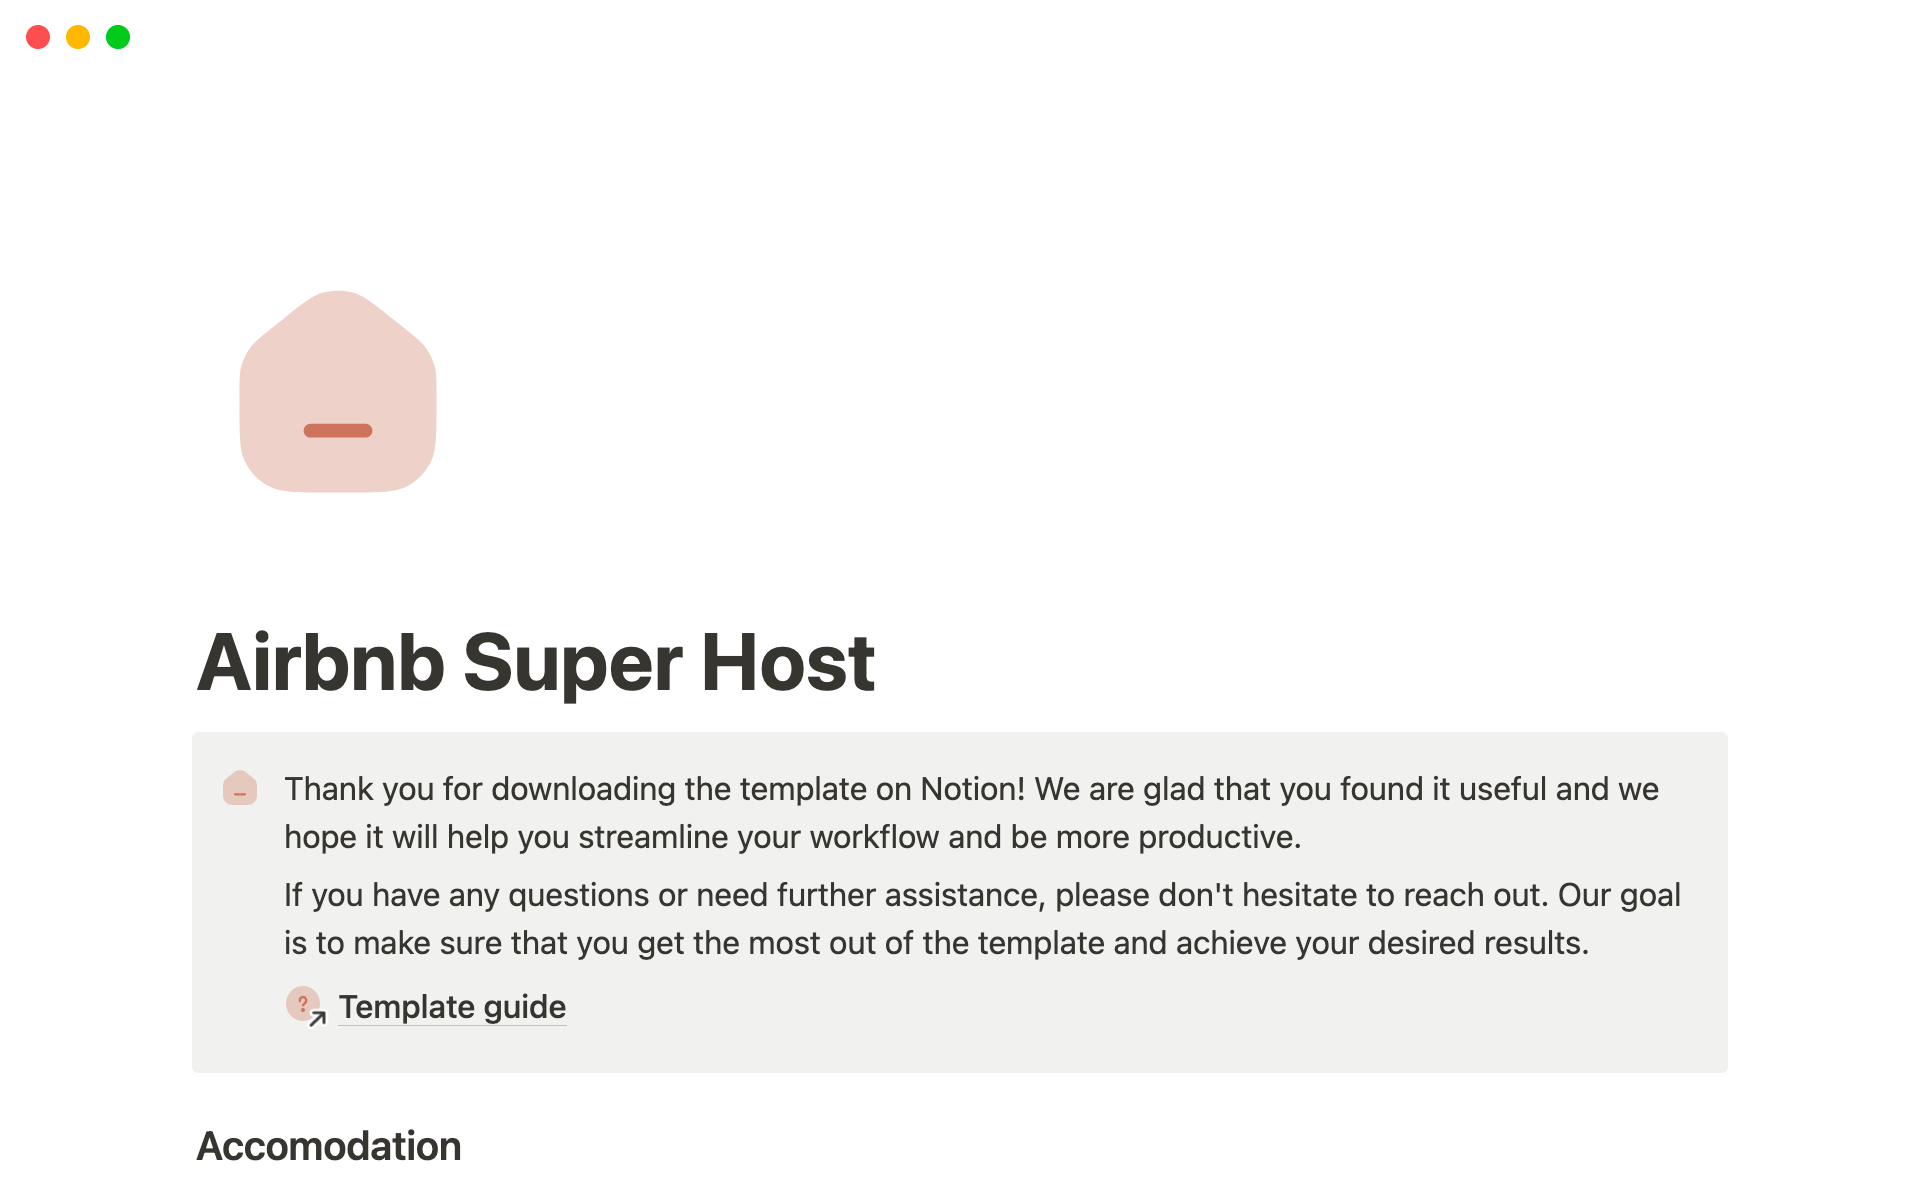 The Airbnb Superhost Template on Notion is a comprehensive tool designed to help hosts organize and streamline their Airbnb listings, communications, and guest information.